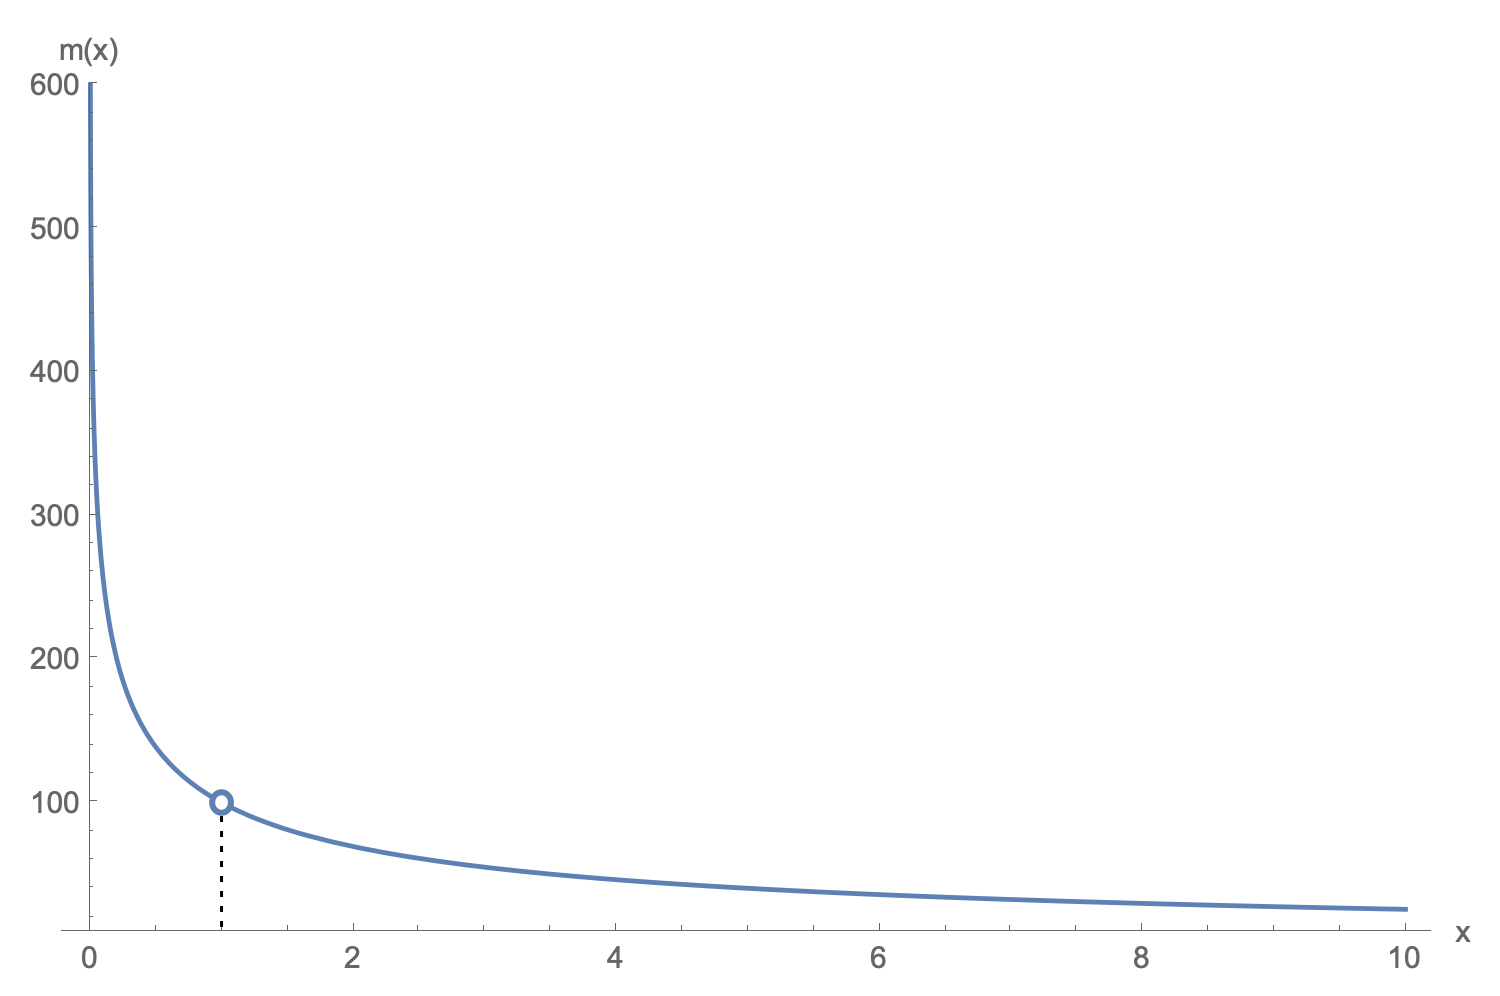 An example plot of $m(x)$ with the hole at $x_i$ shown.